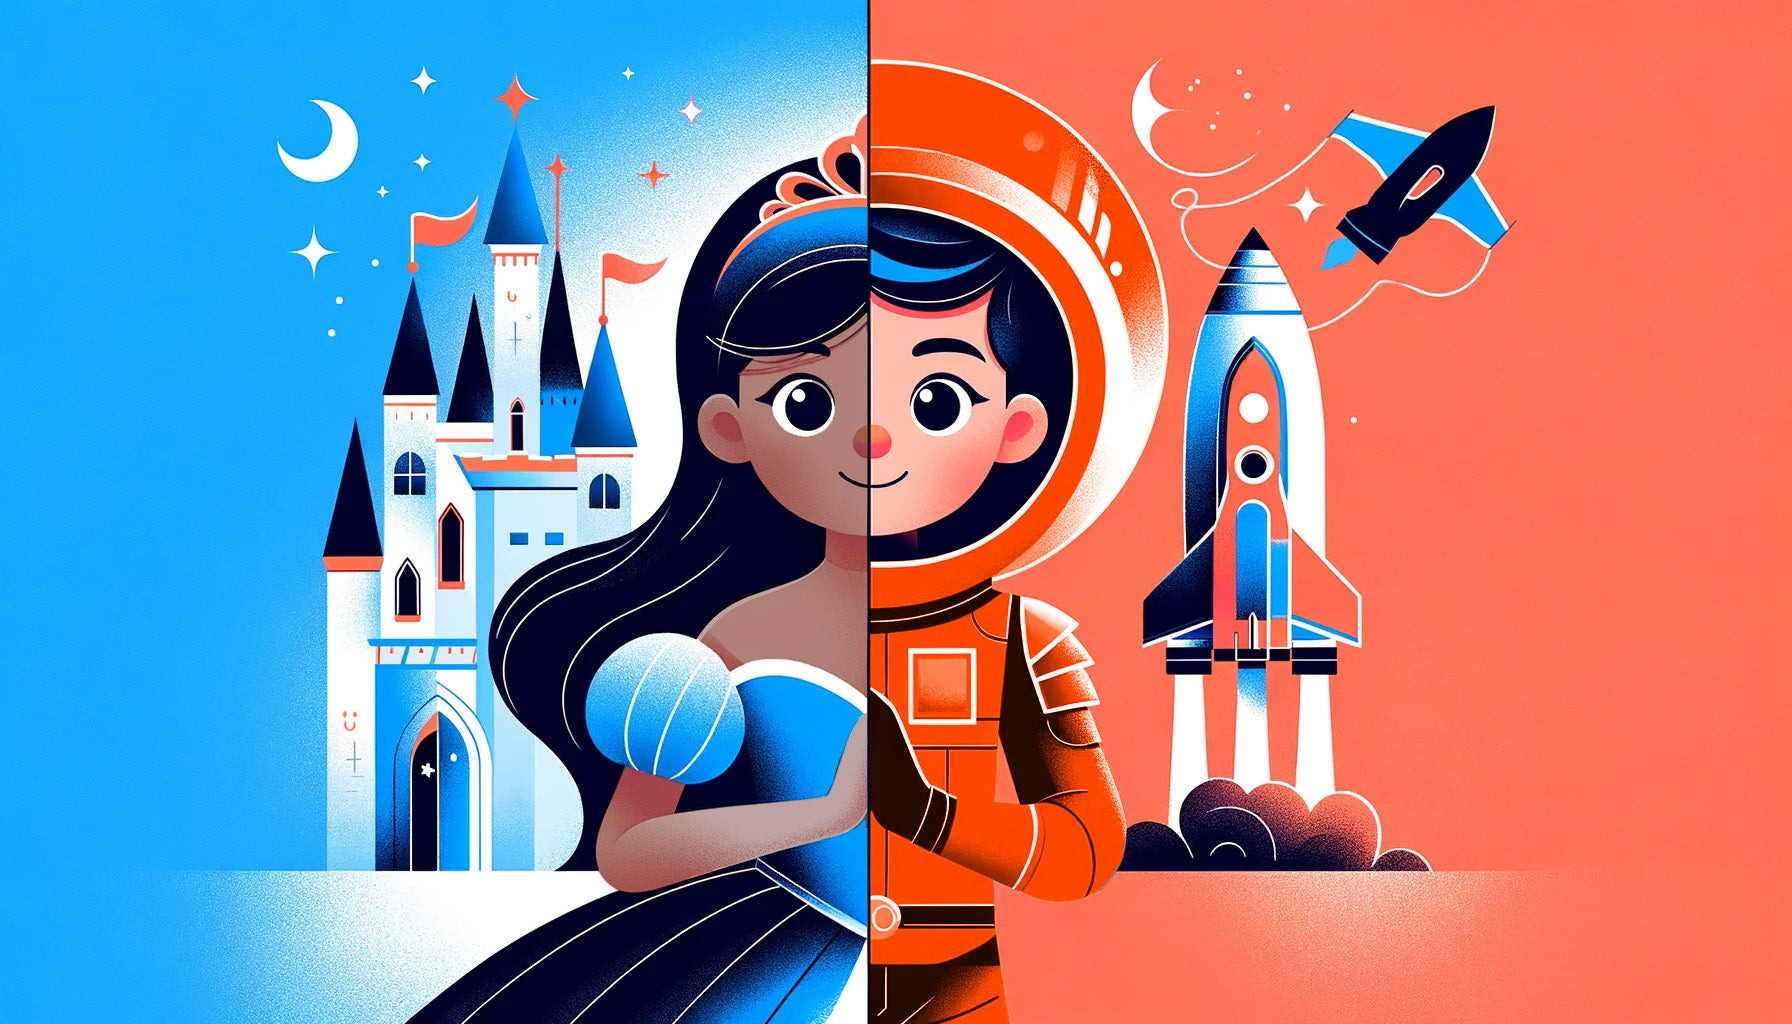 Imagination and Growth - Illustration of Girl in Princess Outfit and Boy in Astronaut Outfit